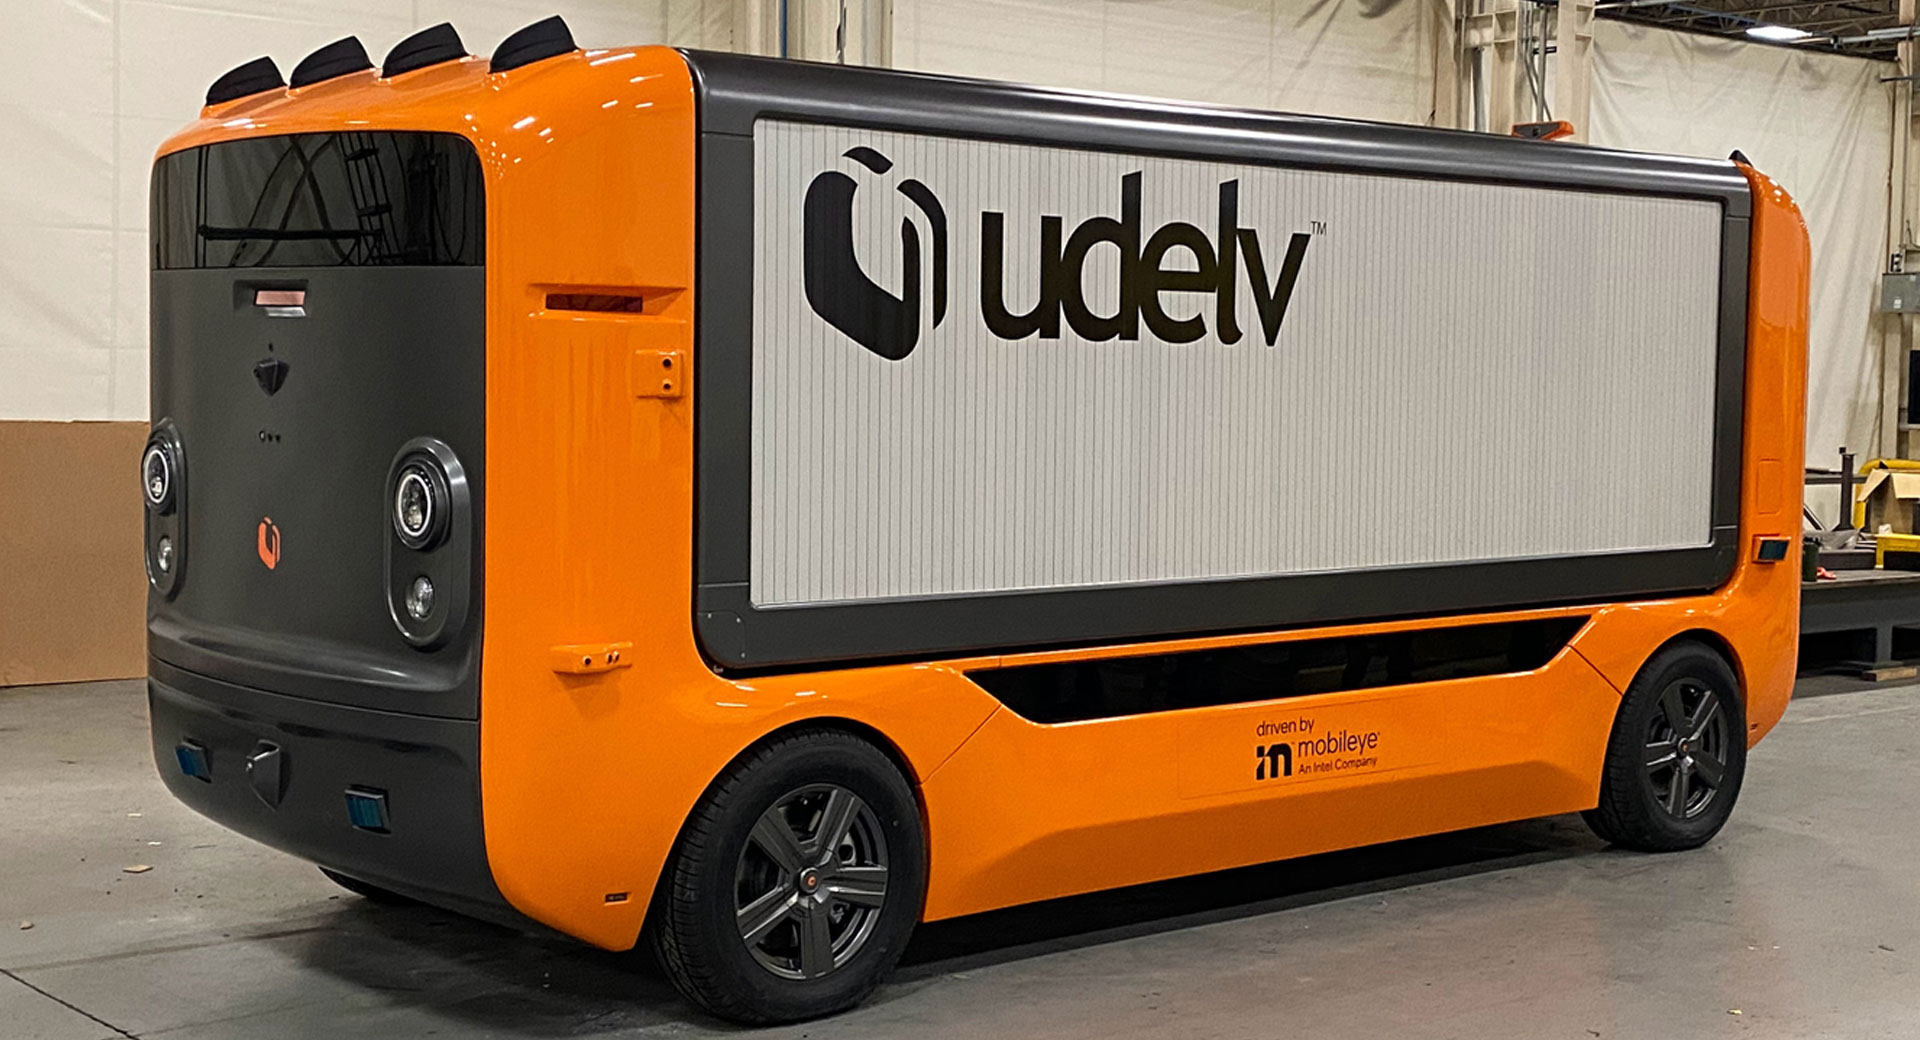 Udelv’s Autonomous Electric Delivery Vehicle Can Carry 2,000 Lbs Of